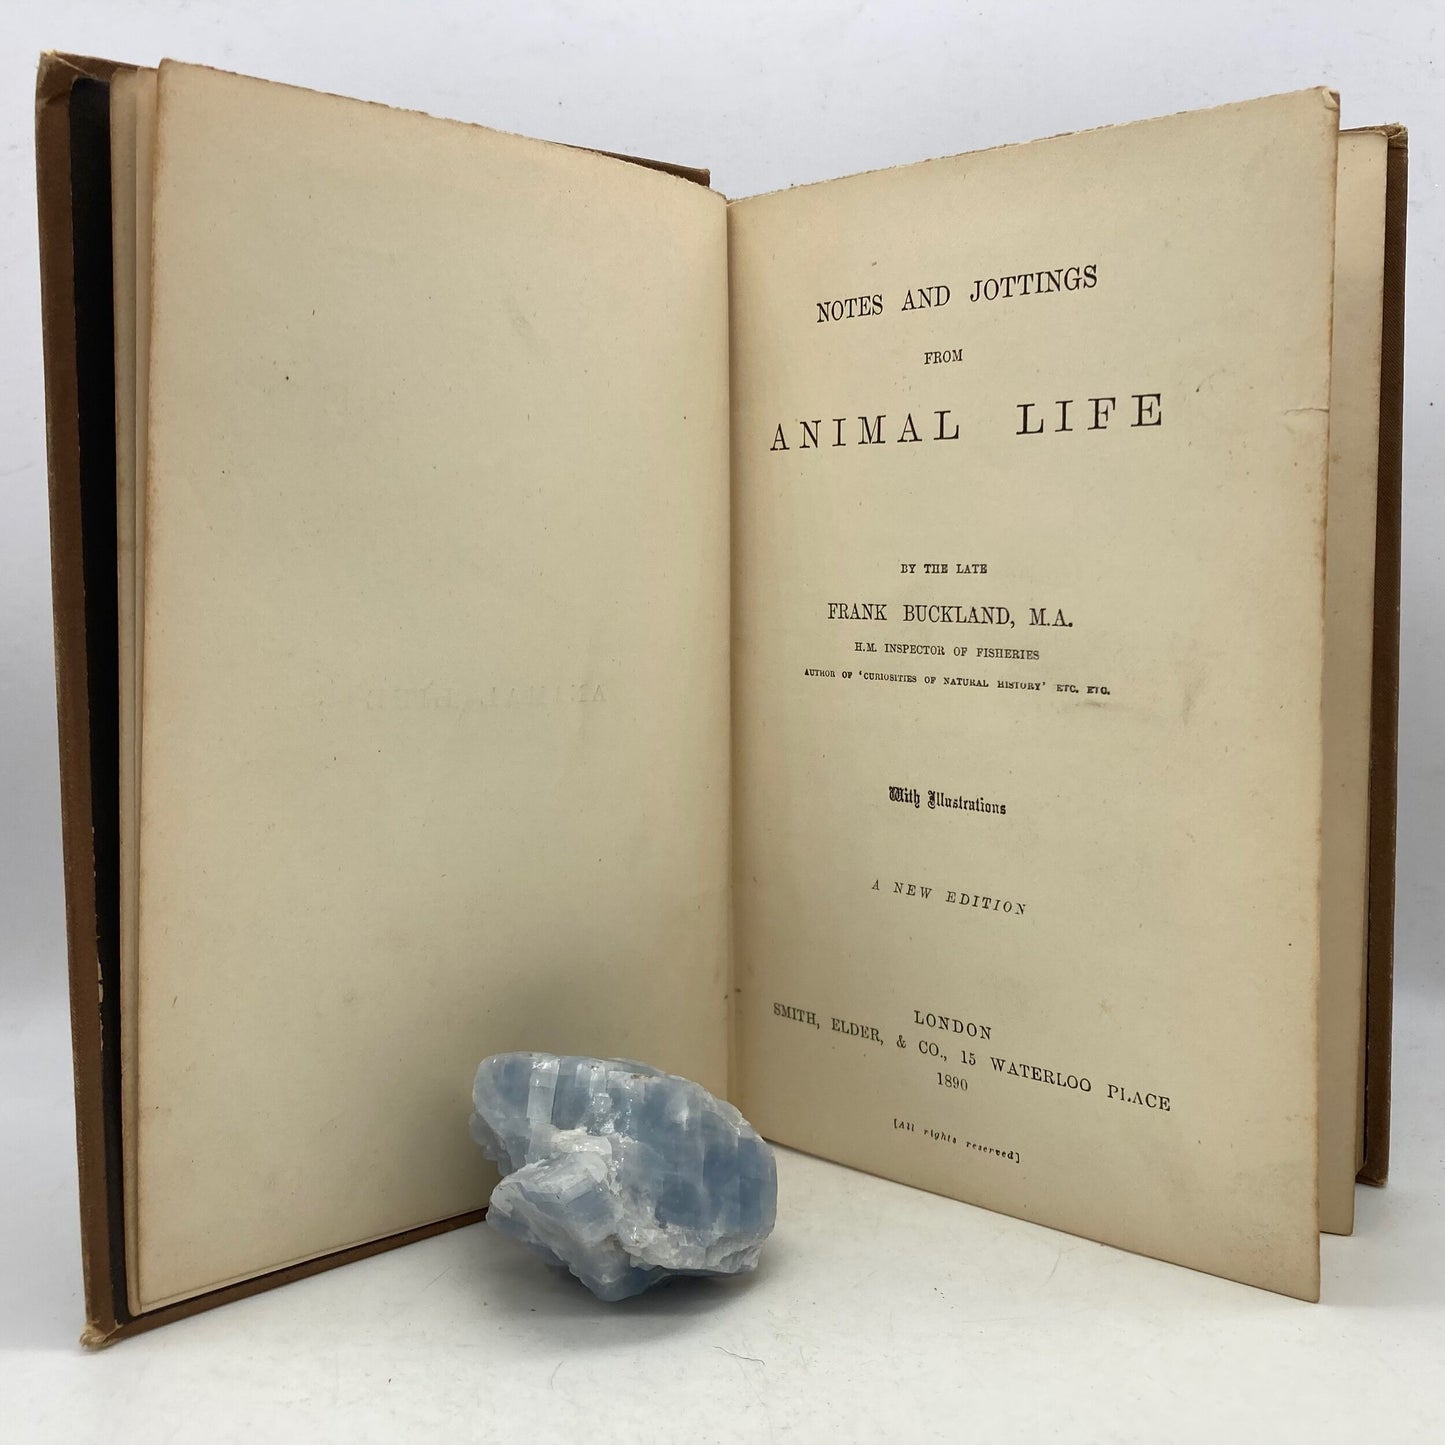 BUCKLAND, Frank "Notes and Jottings from Animal Life" [Frederick Warne, 1890] - Buzz Bookstore